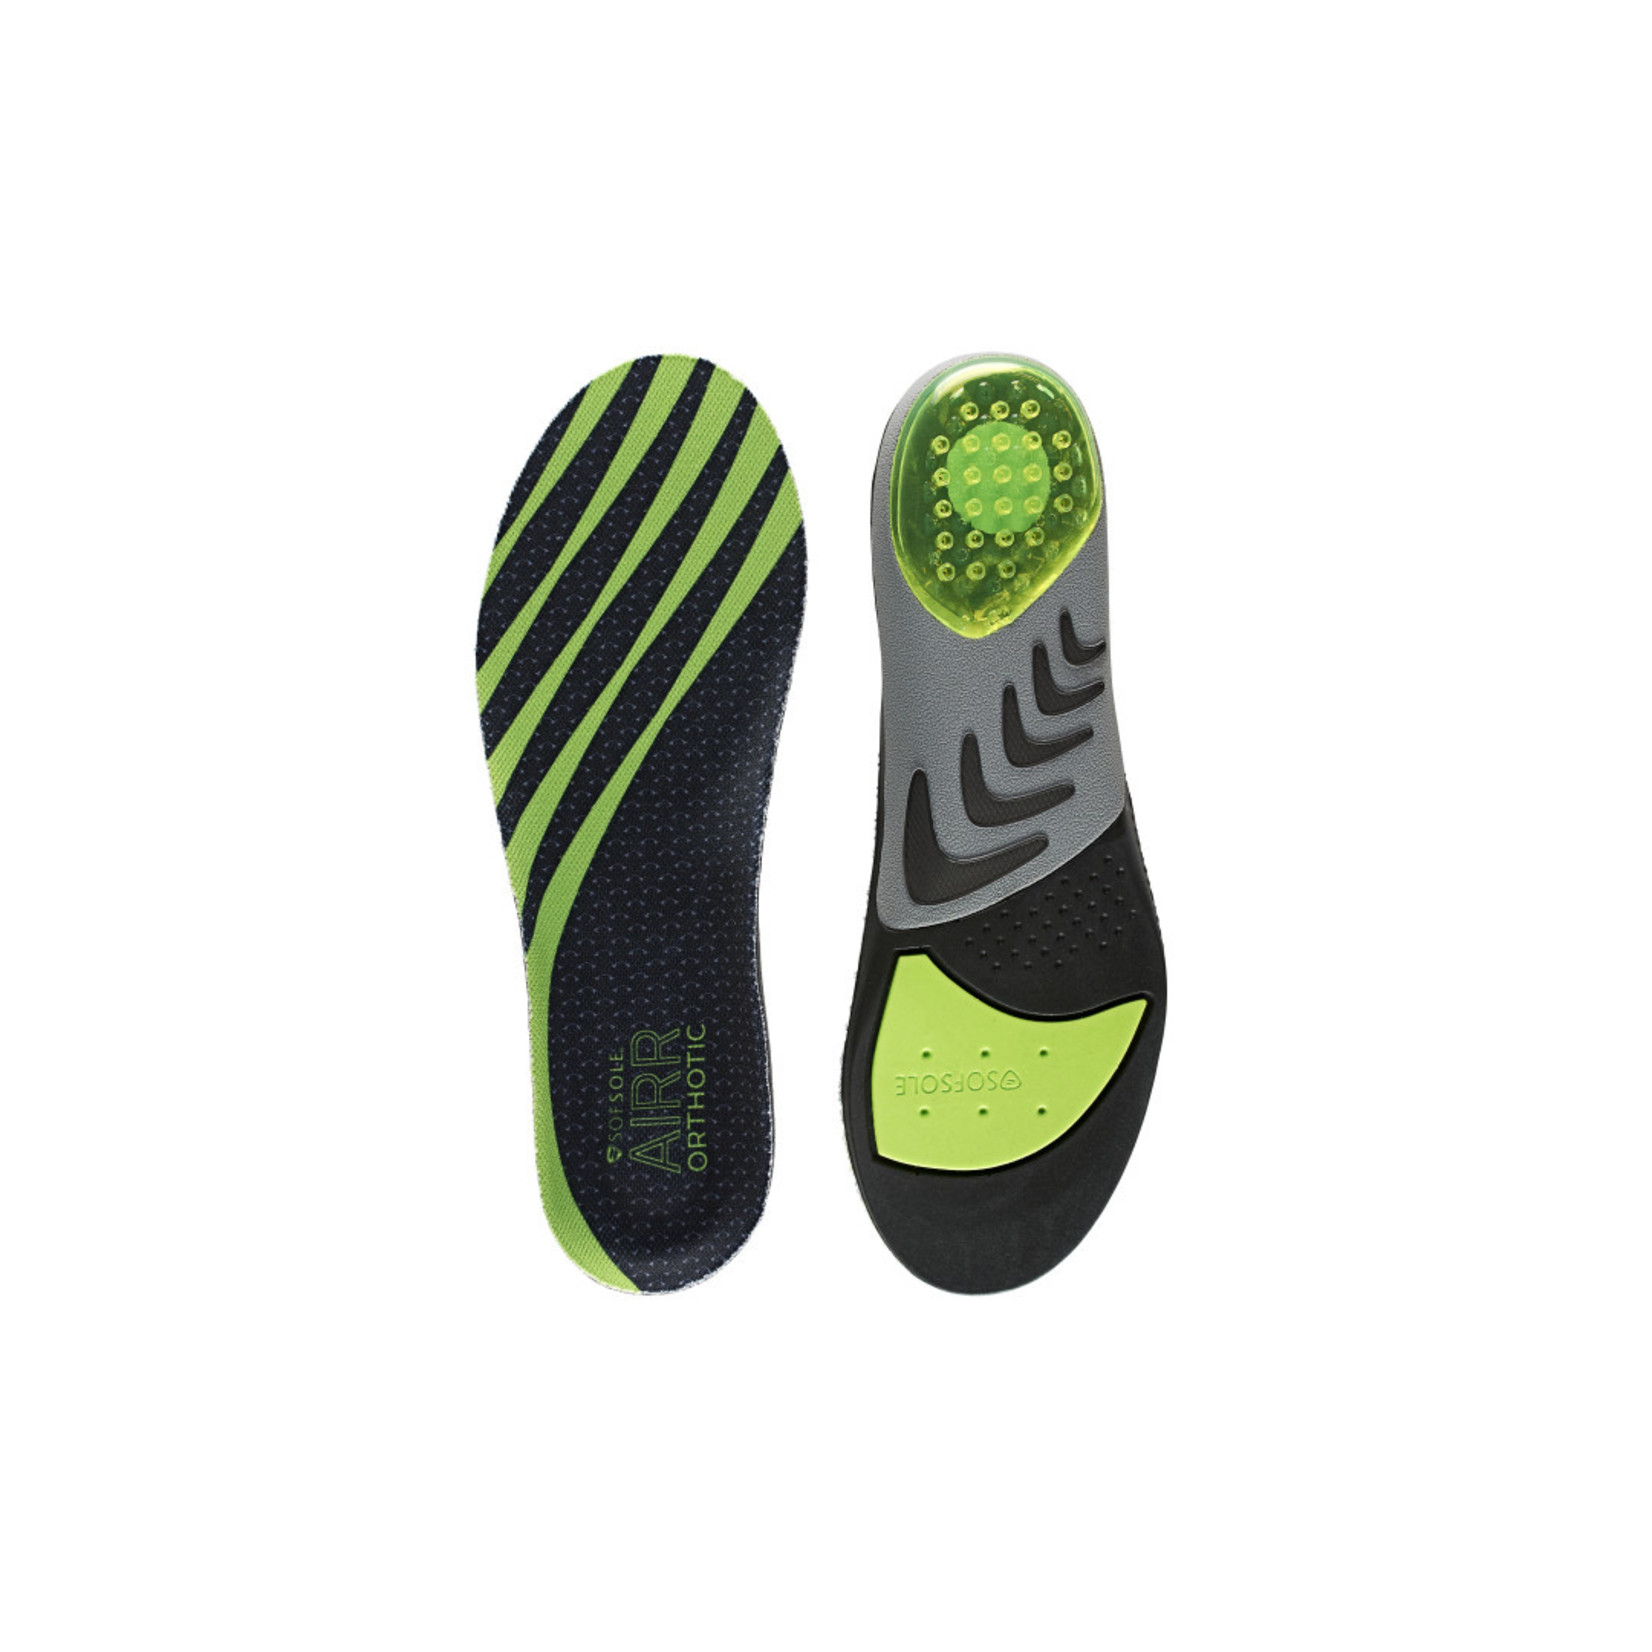 Sofsole Sofsole Men's Airr Orthotic Insole